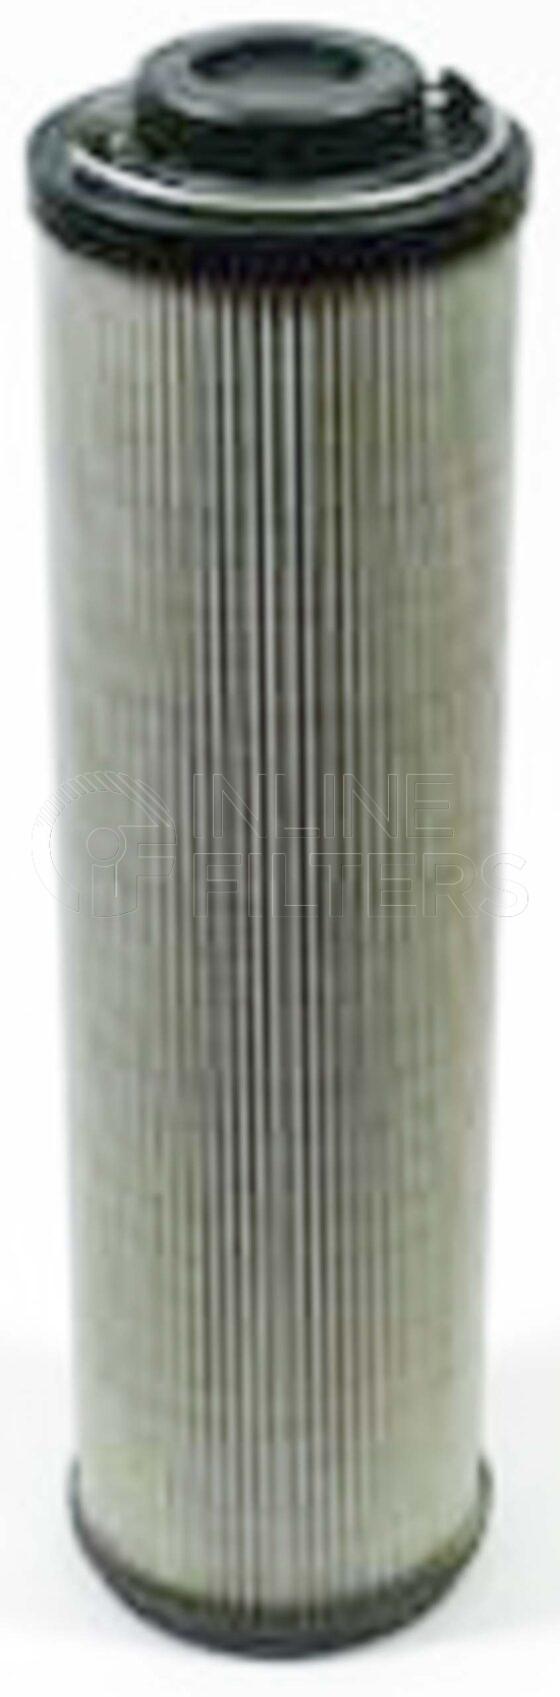 Fleetguard ST1154. Hydraulic Filter Product – Brand Specific Fleetguard – Undefined Product Fleetguard filter product Hydraulic Filter. Main Cross Reference is Hydac 850R010BN3HC. Particle Size at Beta 75: 10.1. Particle Size at Beta 200: 11.5. Fleetguard Part Type: HF